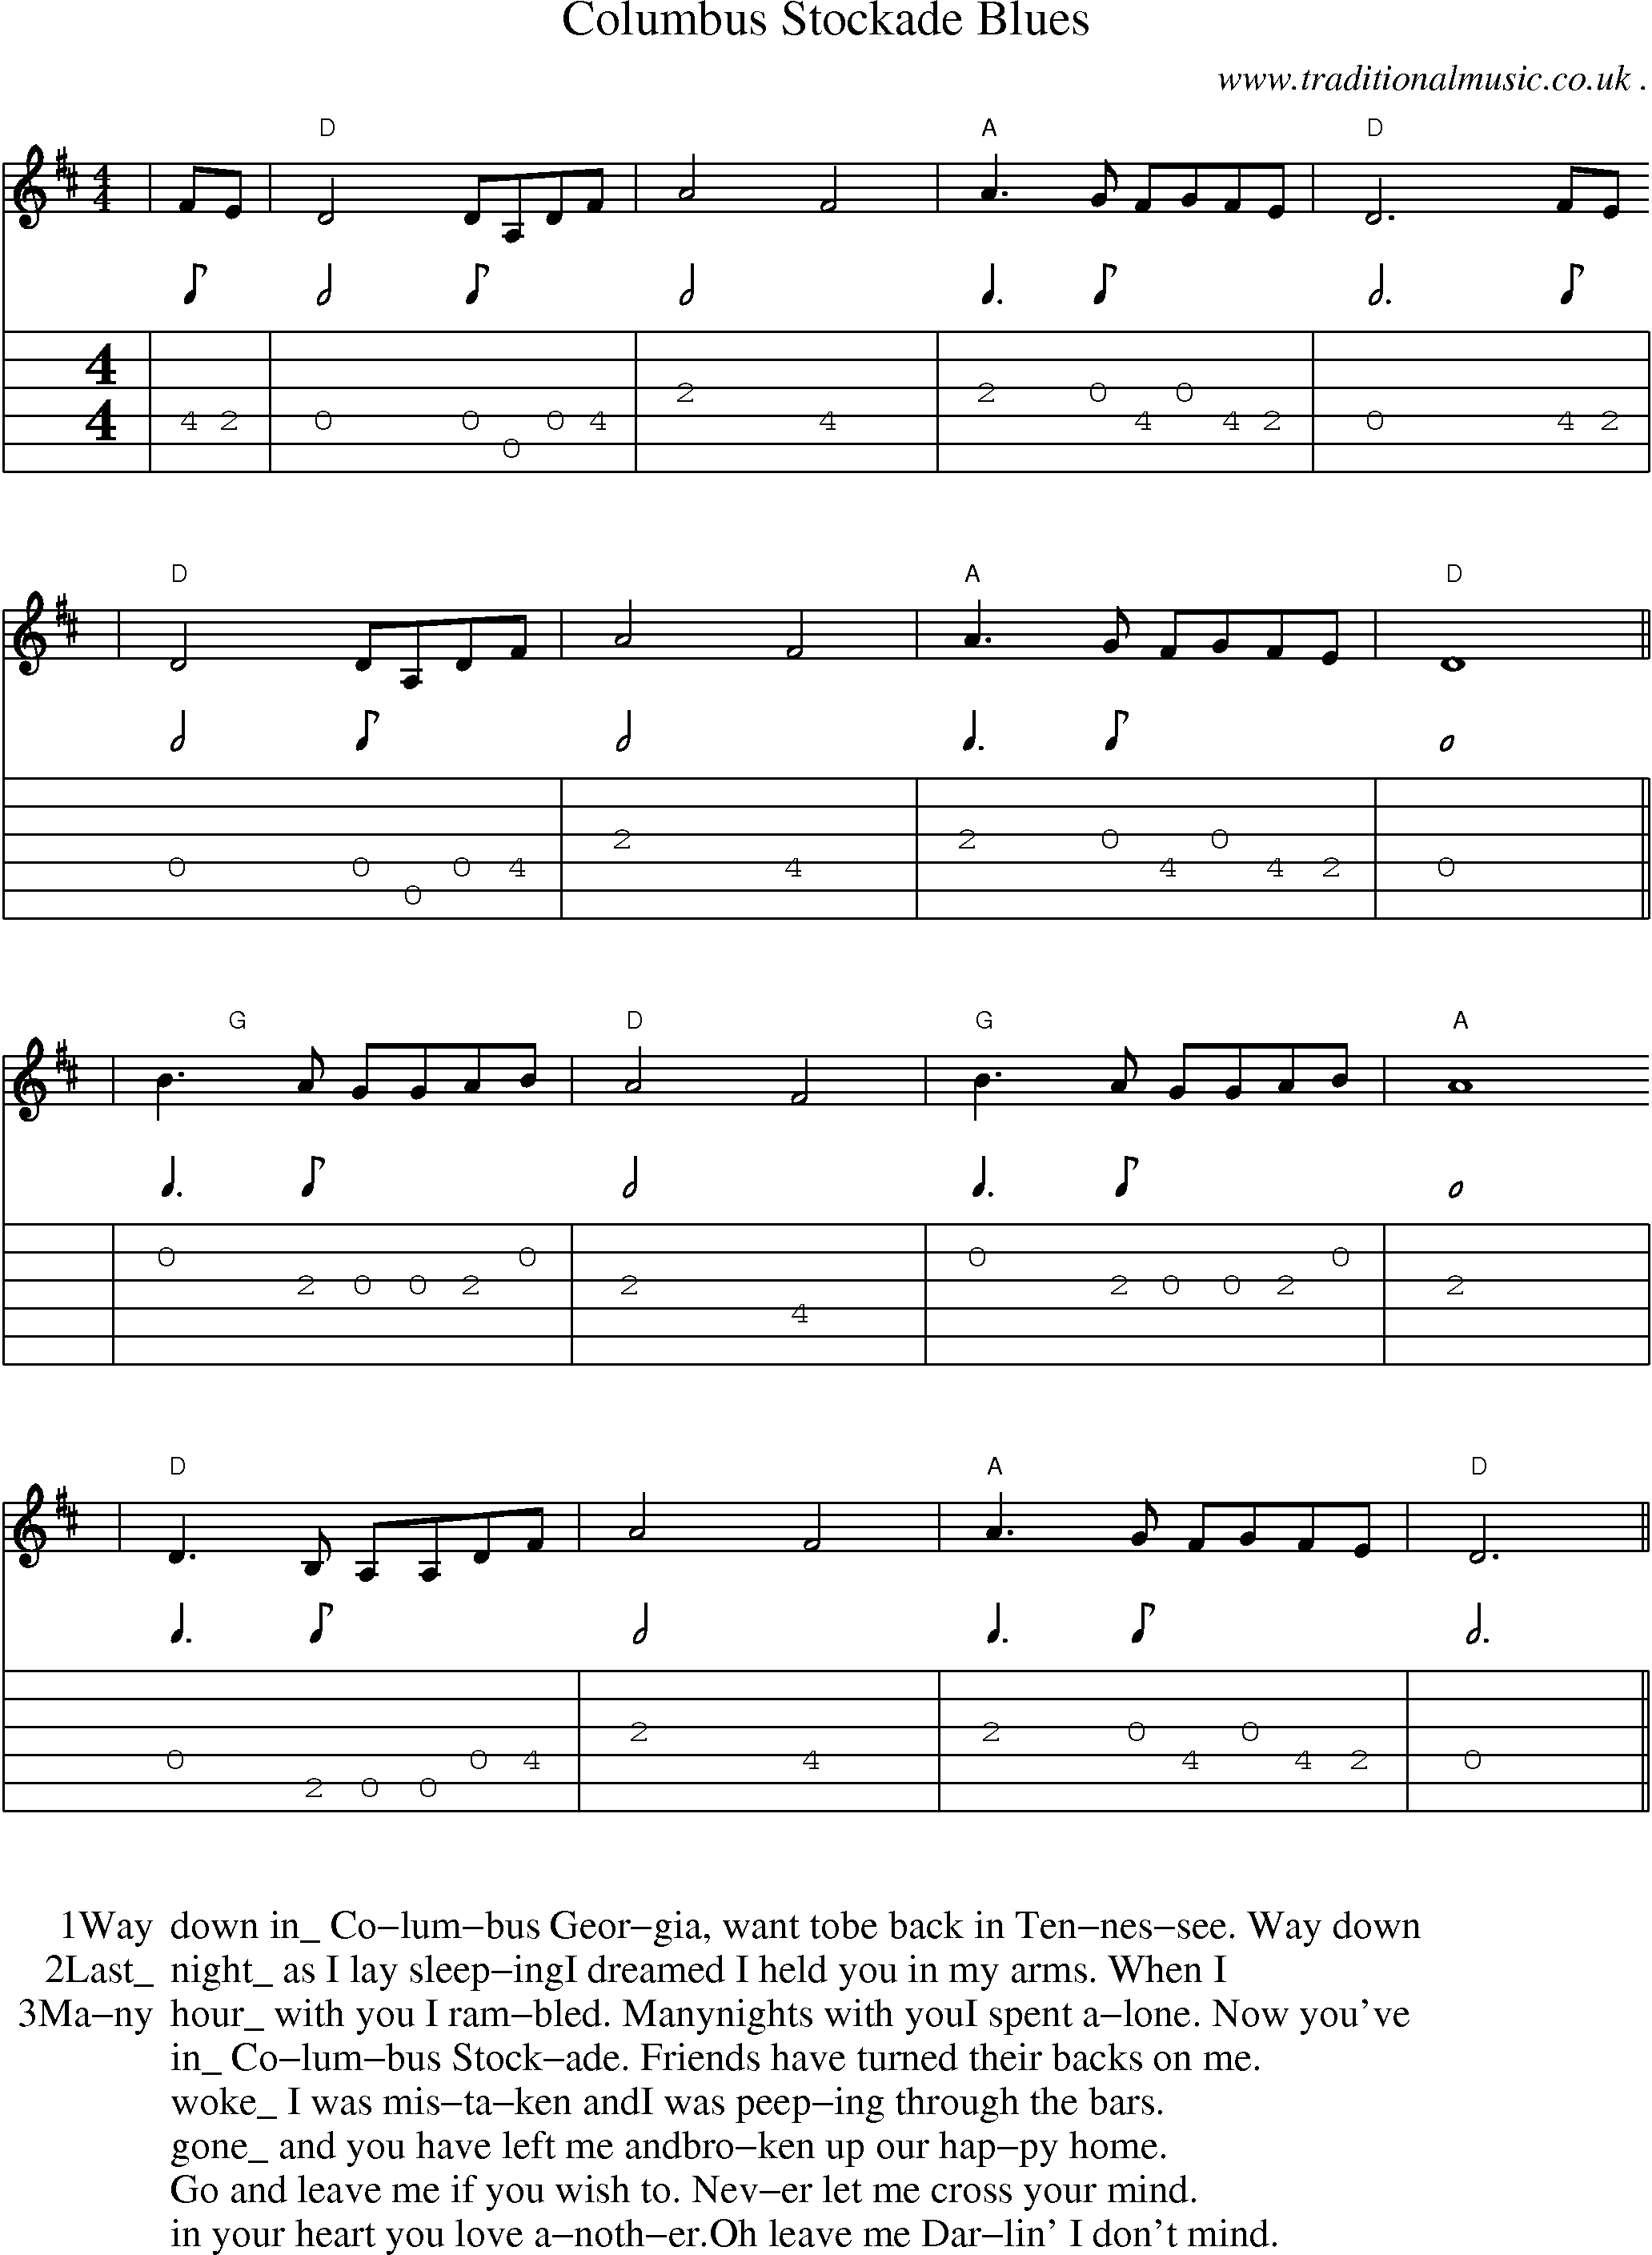 Music Score and Guitar Tabs for Columbus Stockade Blues